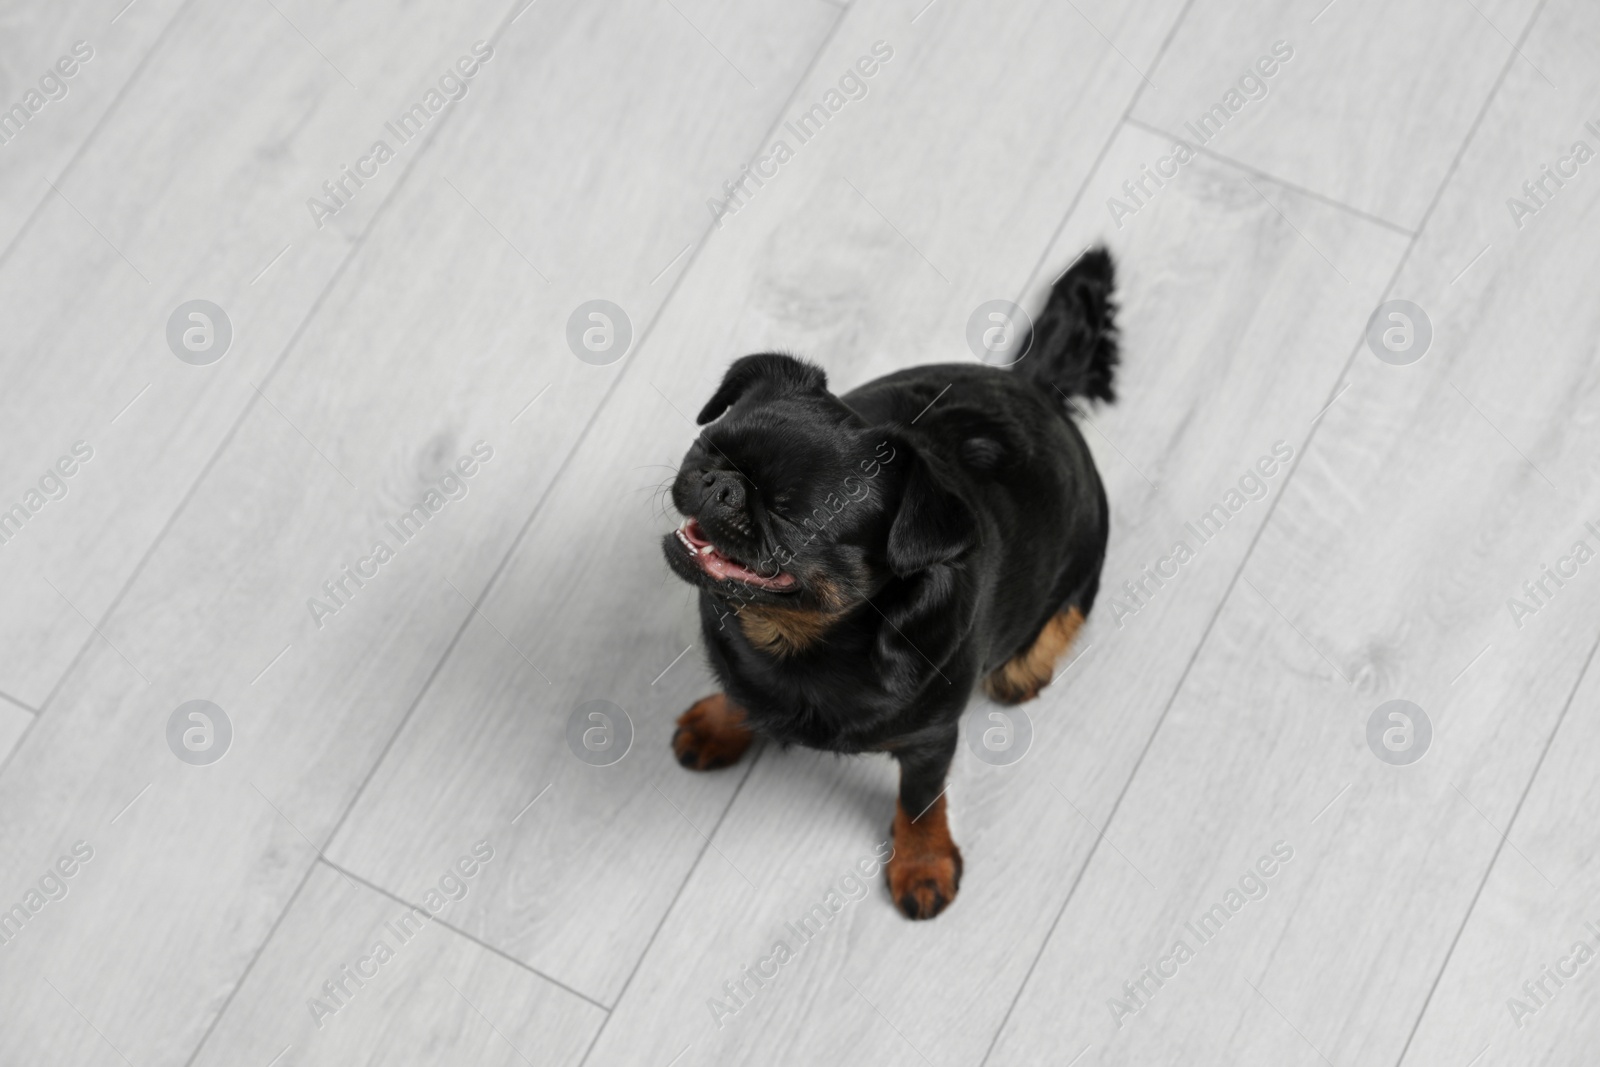 Photo of Adorable black Petit Brabancon dog sitting on wooden floor, above view